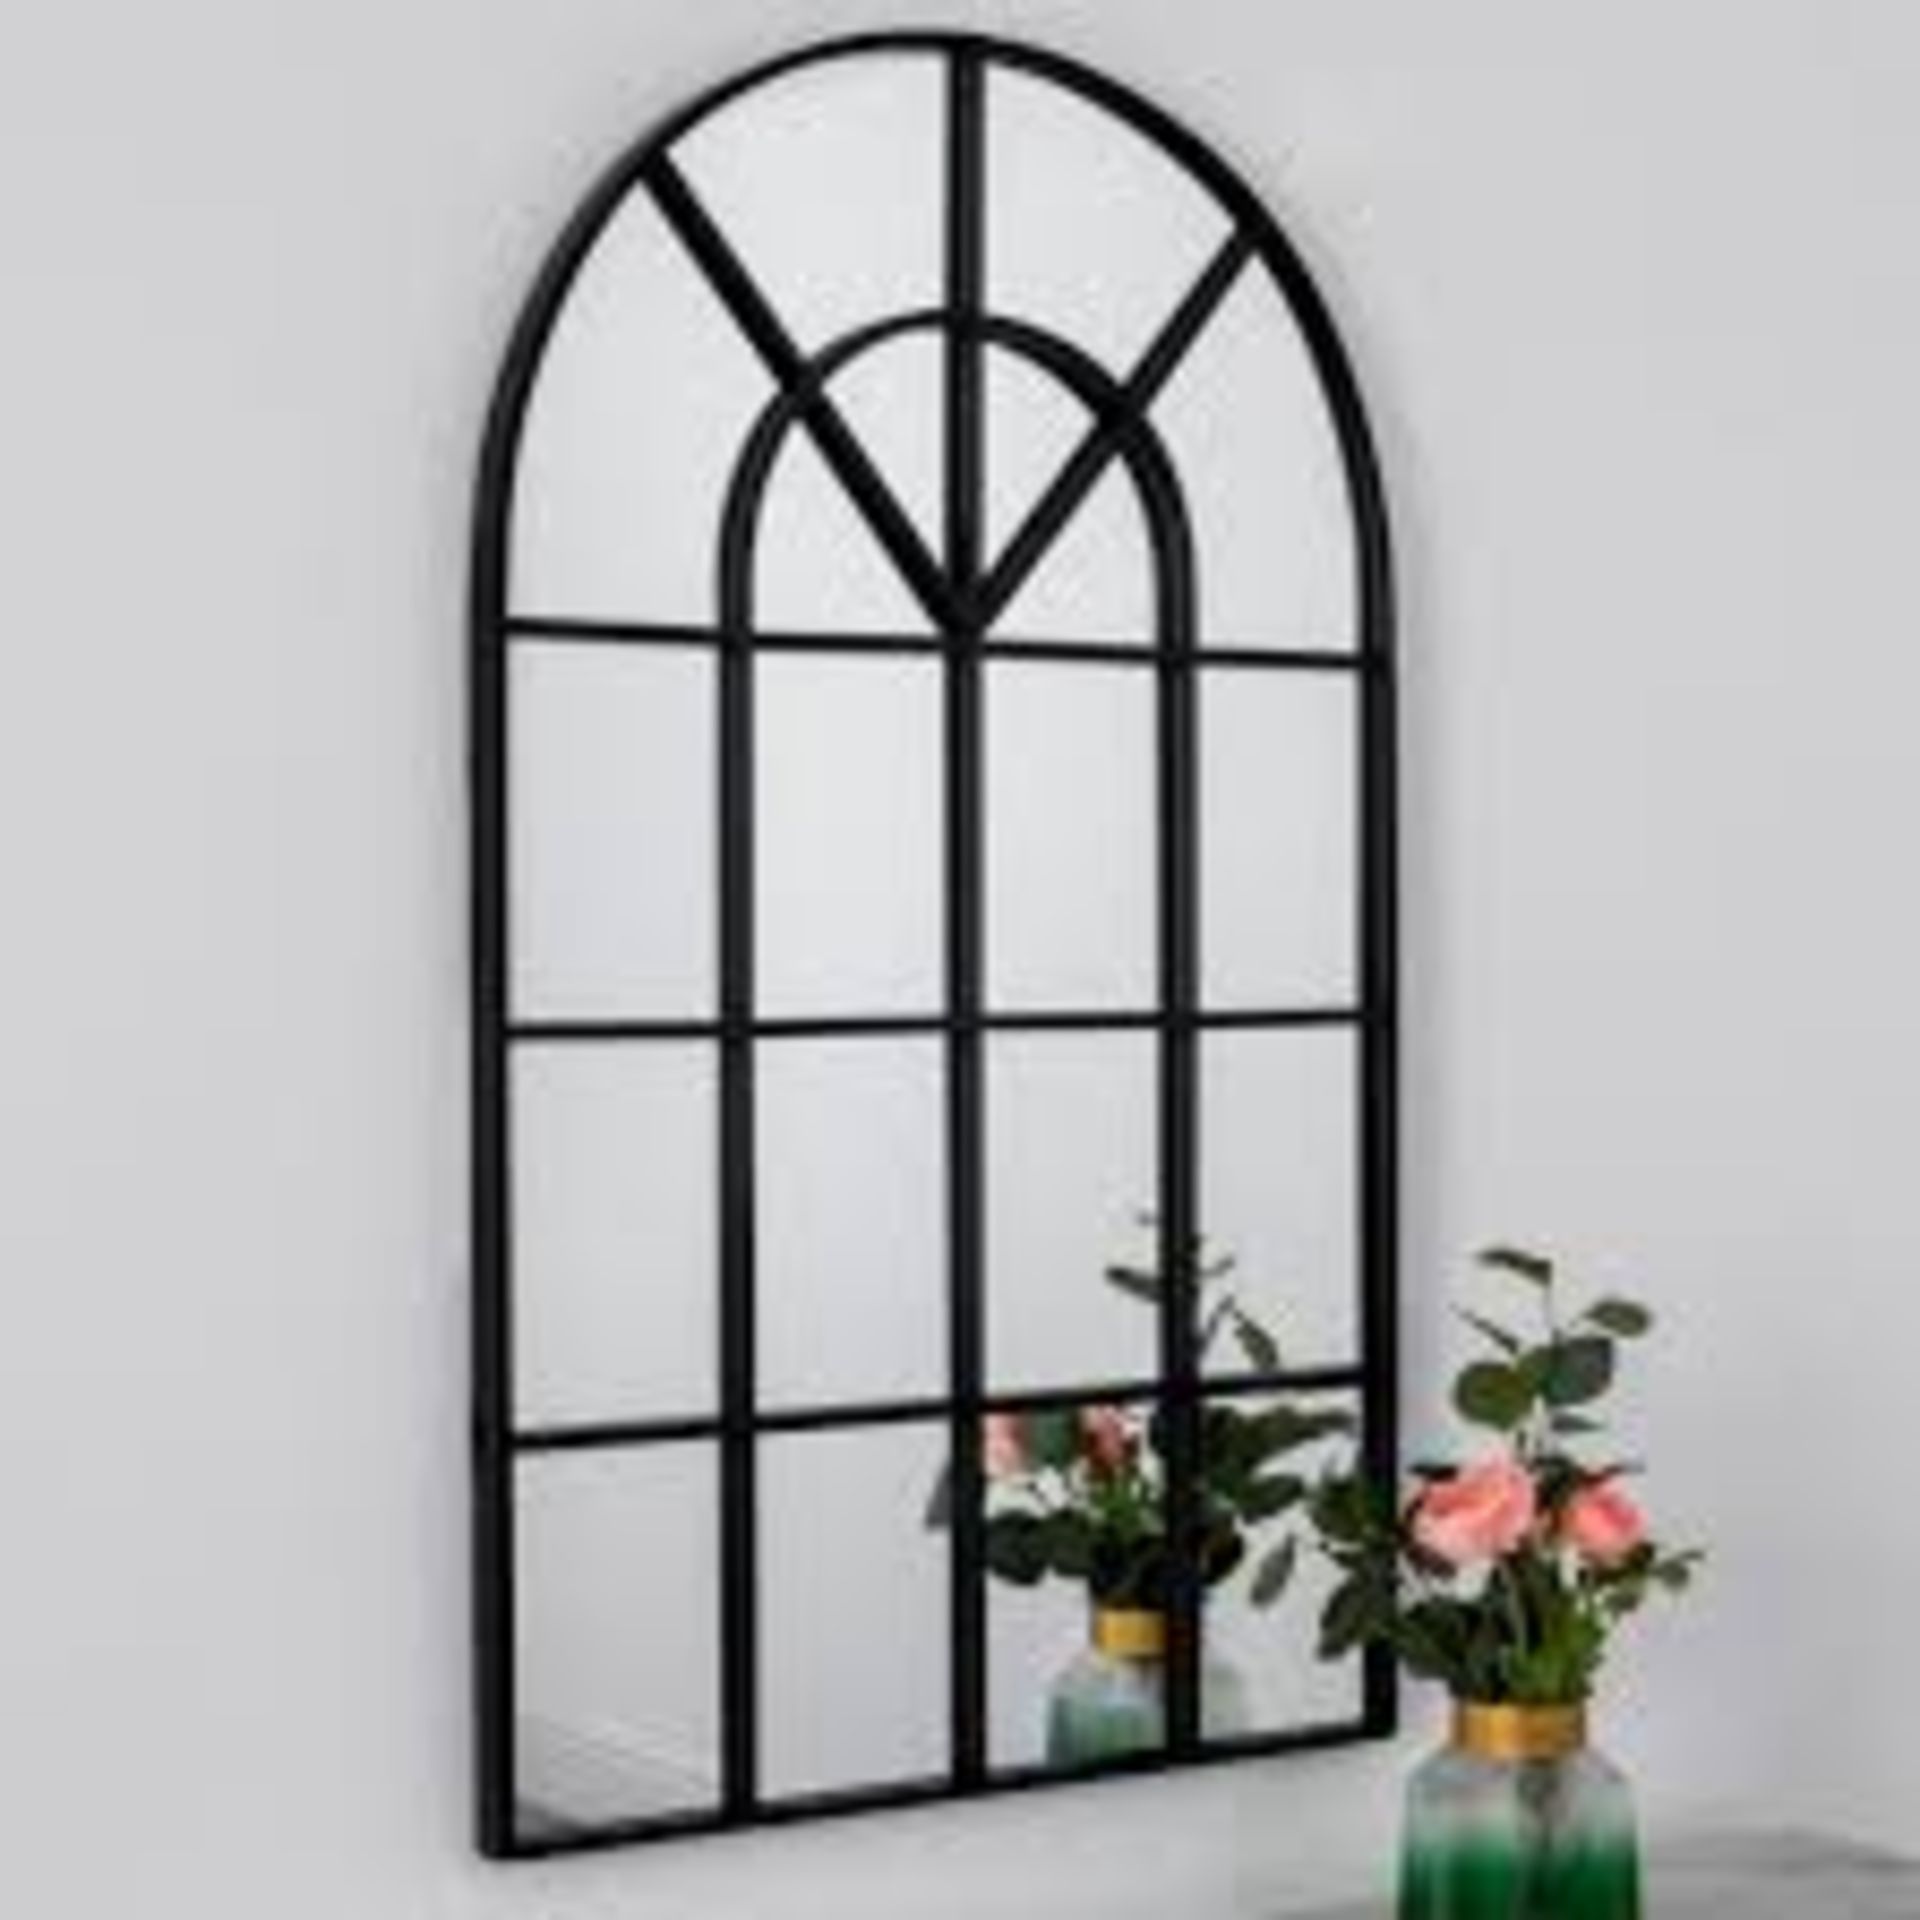 10 X BRAND NEW Native Lifestyle Arched Rome Mirror 100 X 60 X 2CM RRP £210 EACH